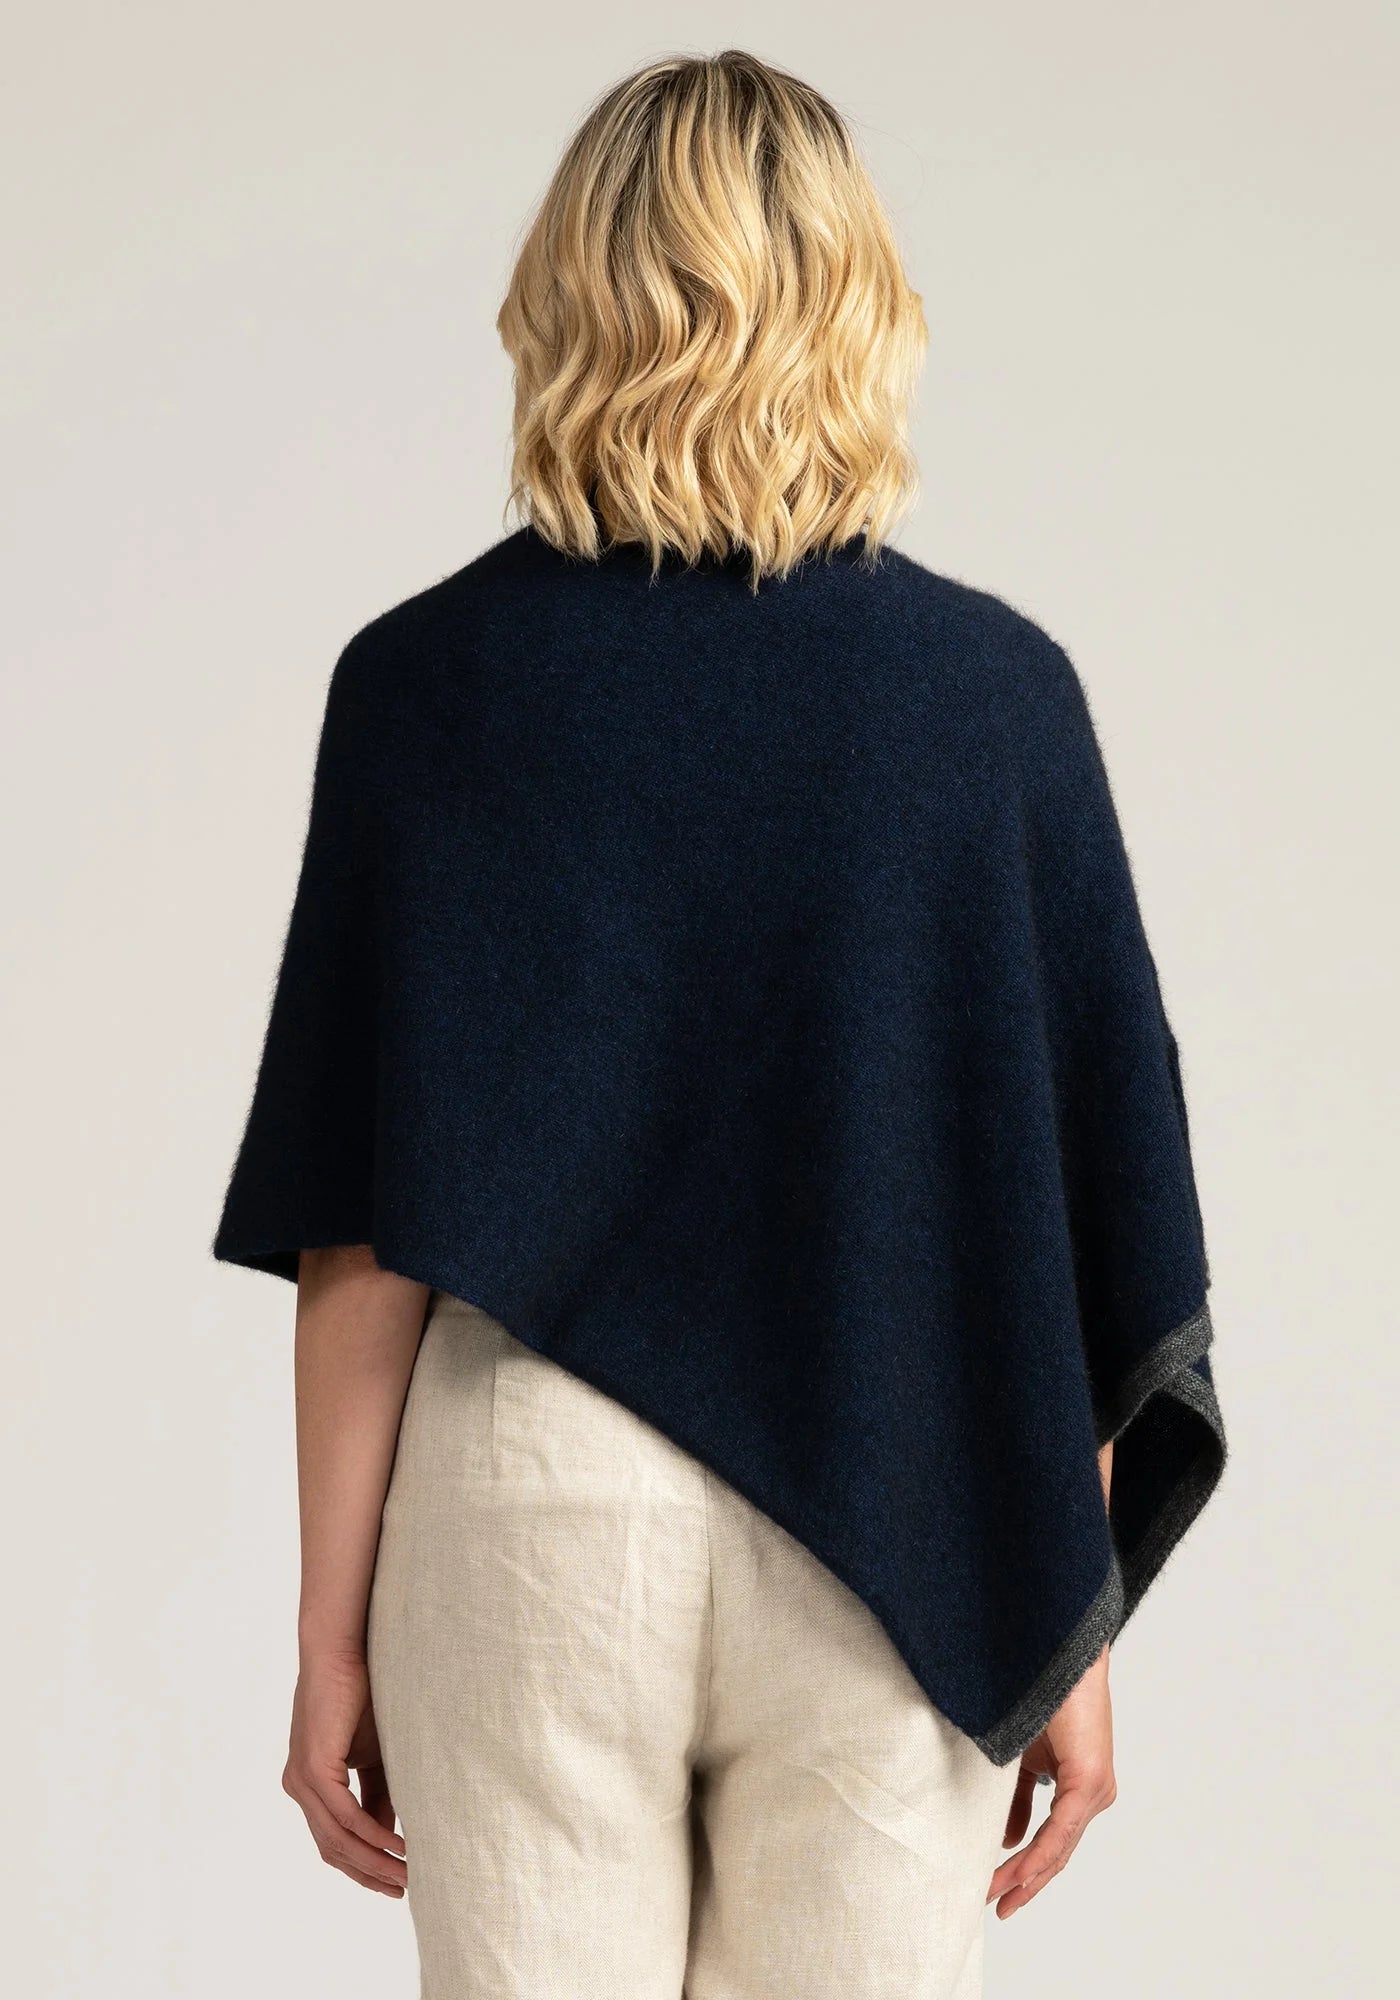 Wrap yourself in comfort with our navy blue merino wool poncho. Effortless chic for any occasion. Get yours today!